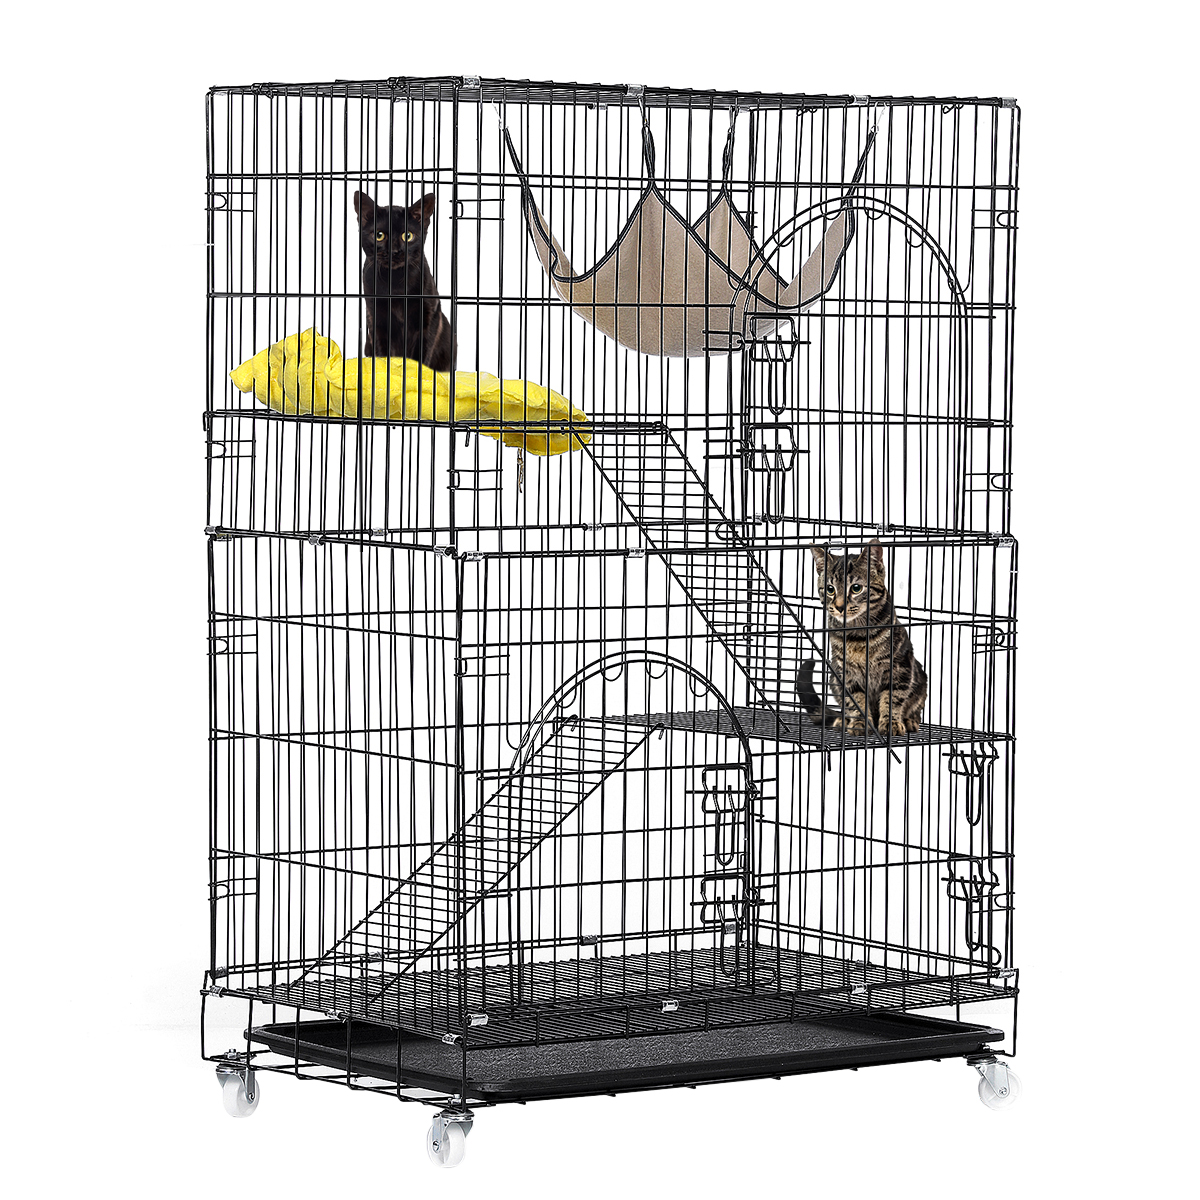 3-Tier-Cat-Cage-Cat-Playpen-Kennel-Crate-Chinchilla-Rat-Box-Cage-Enclosure-with-Ladders-Platforms-Be-1679523-10